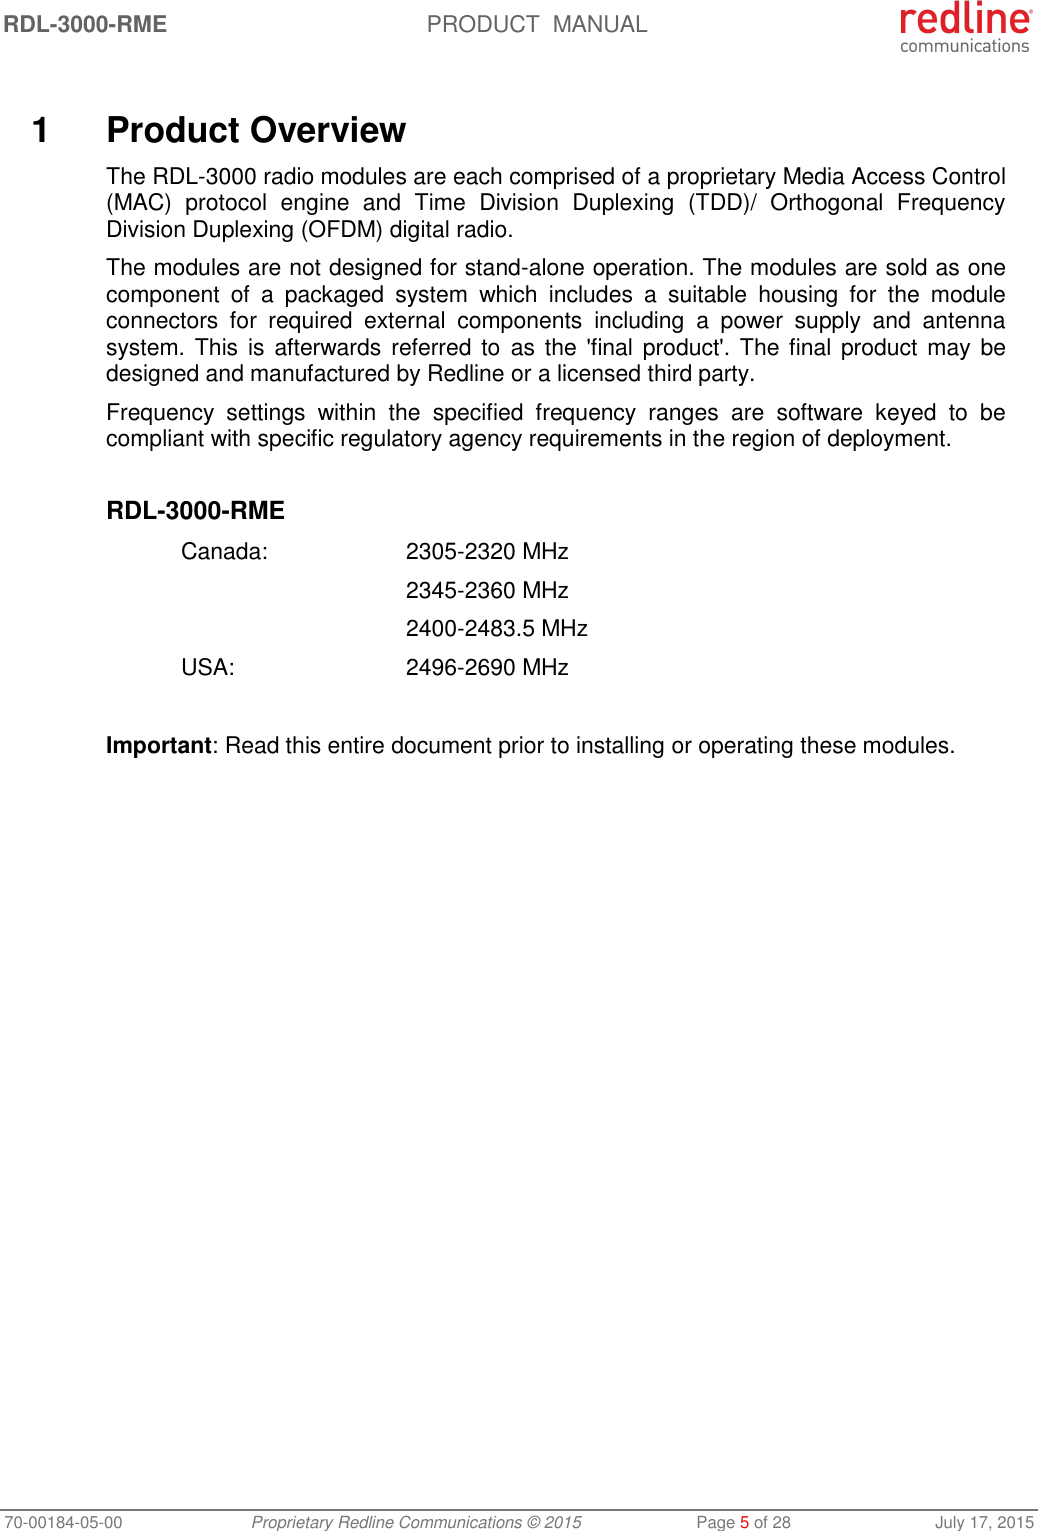 RDL-3000-RME  PRODUCT  MANUAL 70-00184-05-00 Proprietary Redline Communications © 2015  Page 5 of 28  July 17, 2015   1  Product Overview The RDL-3000 radio modules are each comprised of a proprietary Media Access Control (MAC)  protocol  engine  and  Time  Division  Duplexing  (TDD)/  Orthogonal  Frequency Division Duplexing (OFDM) digital radio. The modules are not designed for stand-alone operation. The modules are sold as one component  of  a  packaged  system  which  includes  a  suitable  housing  for  the  module connectors  for  required  external  components  including  a  power  supply  and  antenna system. This is afterwards  referred to  as  the  &apos;final  product&apos;. The final product  may  be designed and manufactured by Redline or a licensed third party. Frequency  settings  within  the  specified  frequency  ranges  are  software  keyed  to  be compliant with specific regulatory agency requirements in the region of deployment.  RDL-3000-RME   Canada:    2305-2320 MHz     2345-2360 MHz     2400-2483.5 MHz  USA:   2496-2690 MHz  Important: Read this entire document prior to installing or operating these modules.  